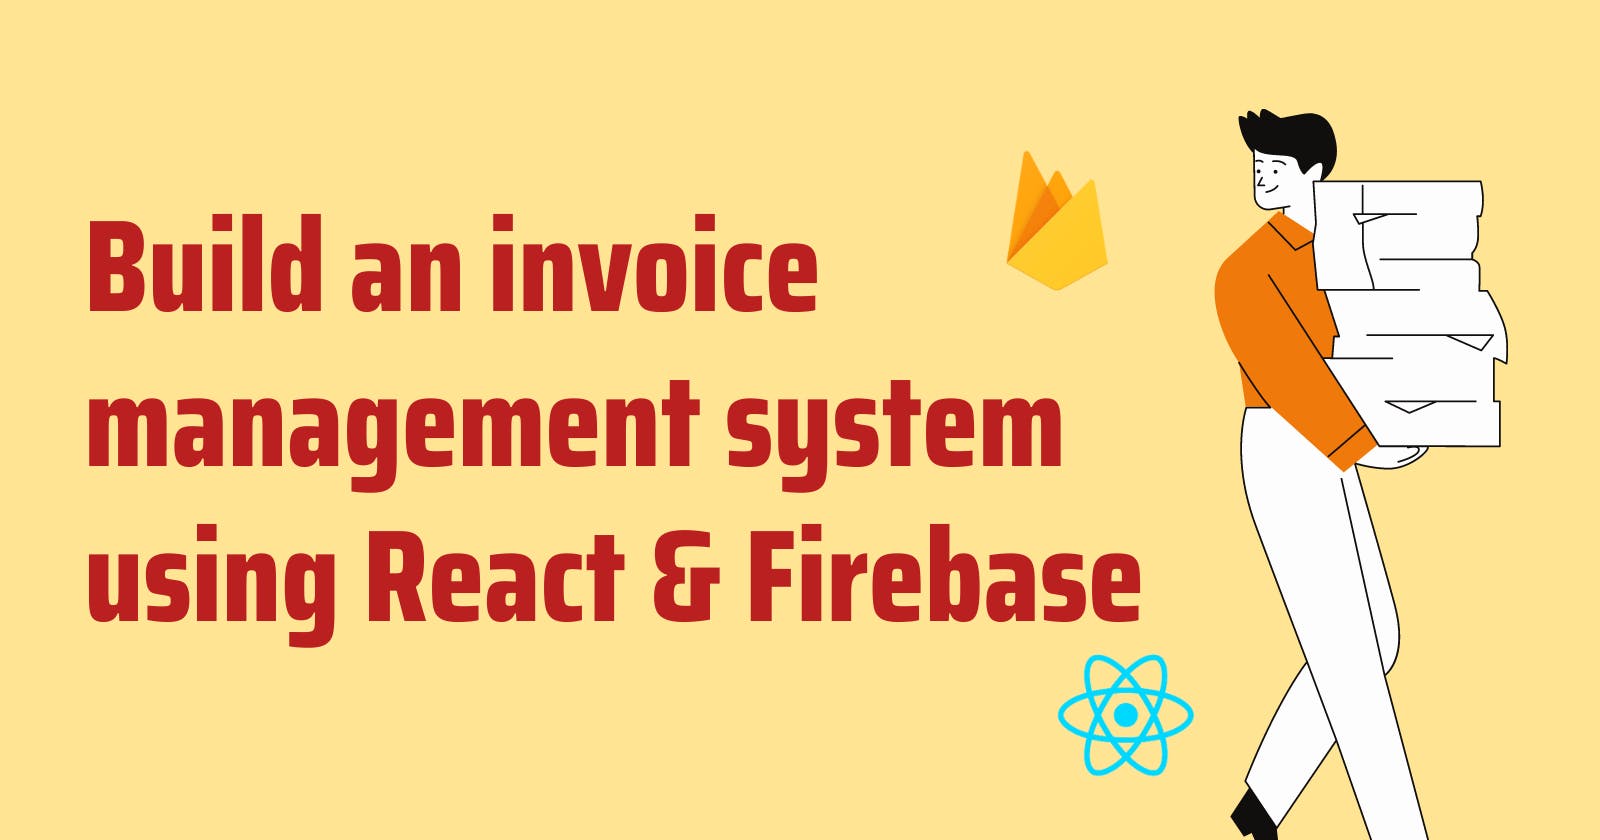 Build an invoice management system using React & Firebase v9